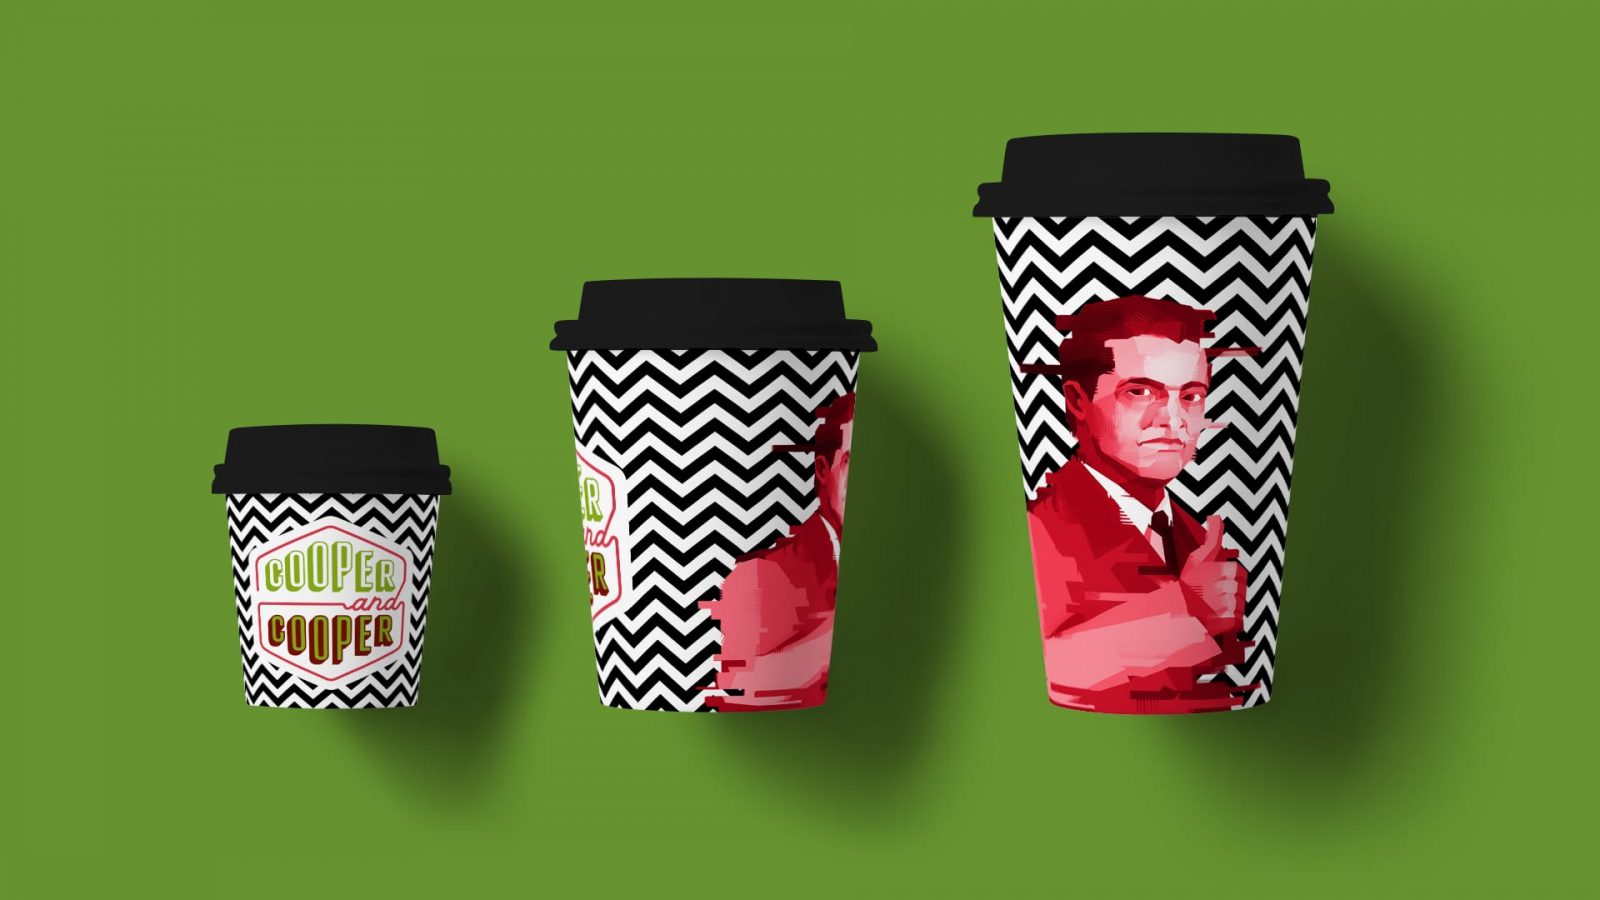 Cooper and Cooper Coffee and Twin Peaks